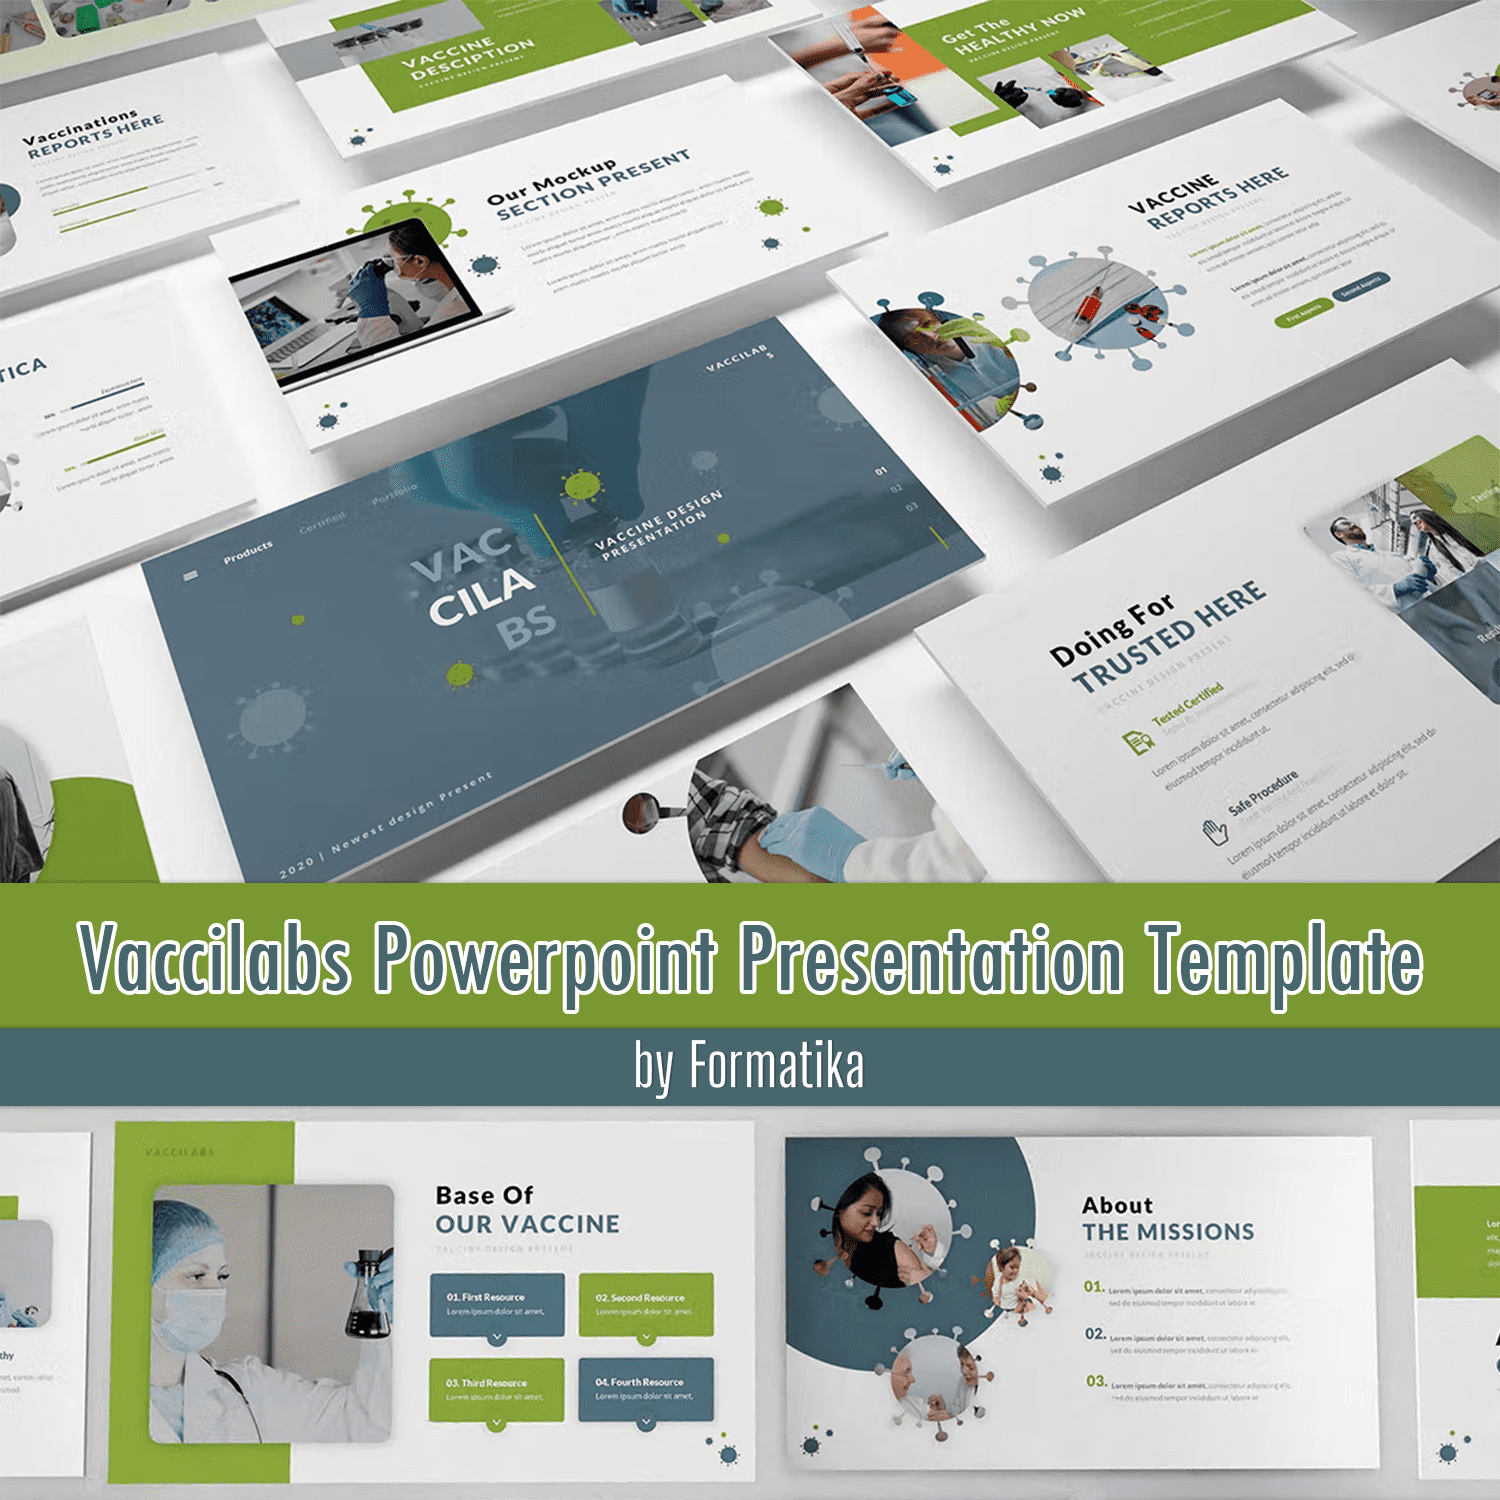 The mission of the Vaccilabs Powerpoint Presentation Template.